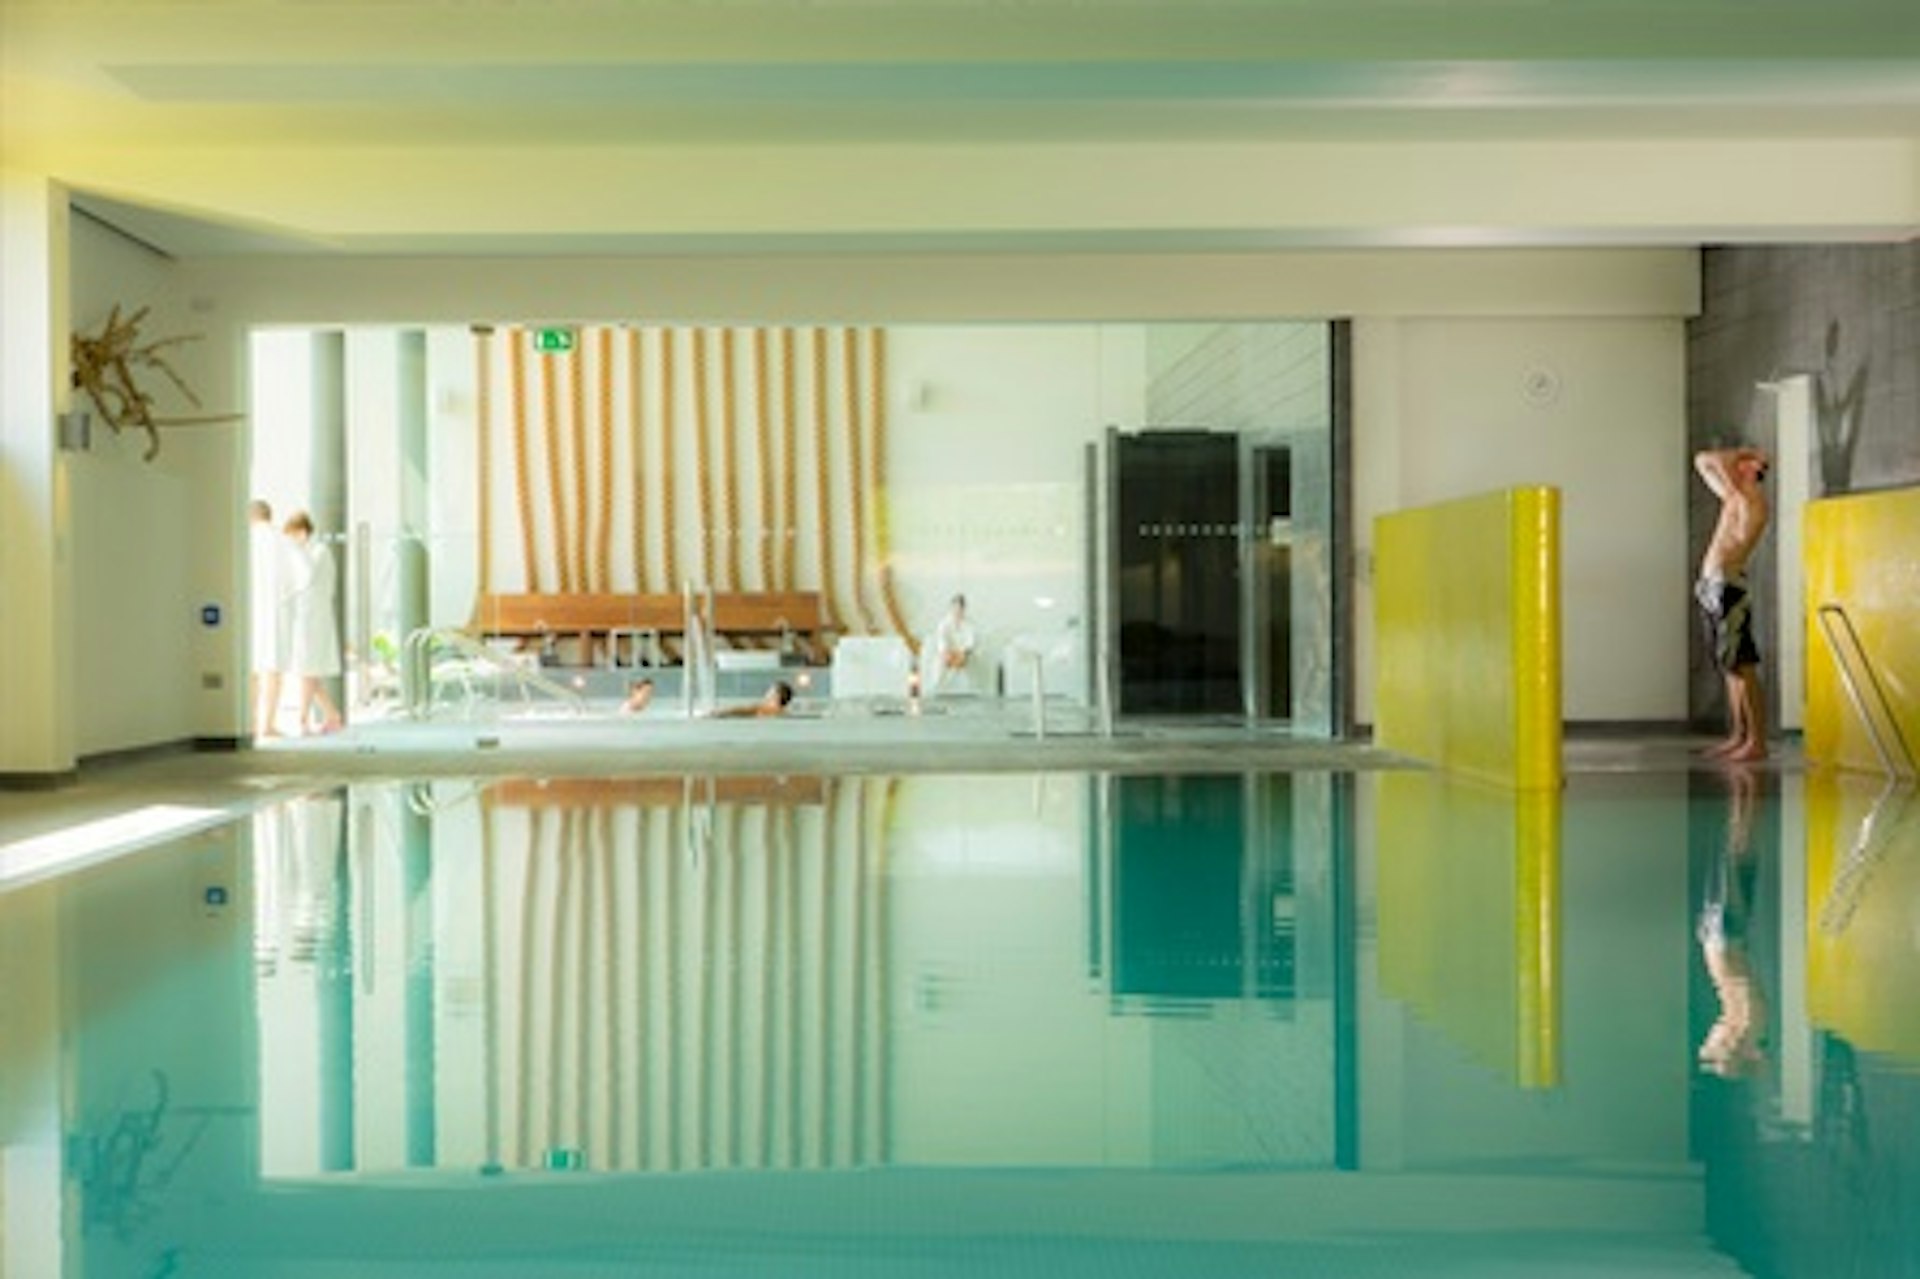 Two Night Stay with Dinner for Two at The Lifehouse Spa & Hotel 2